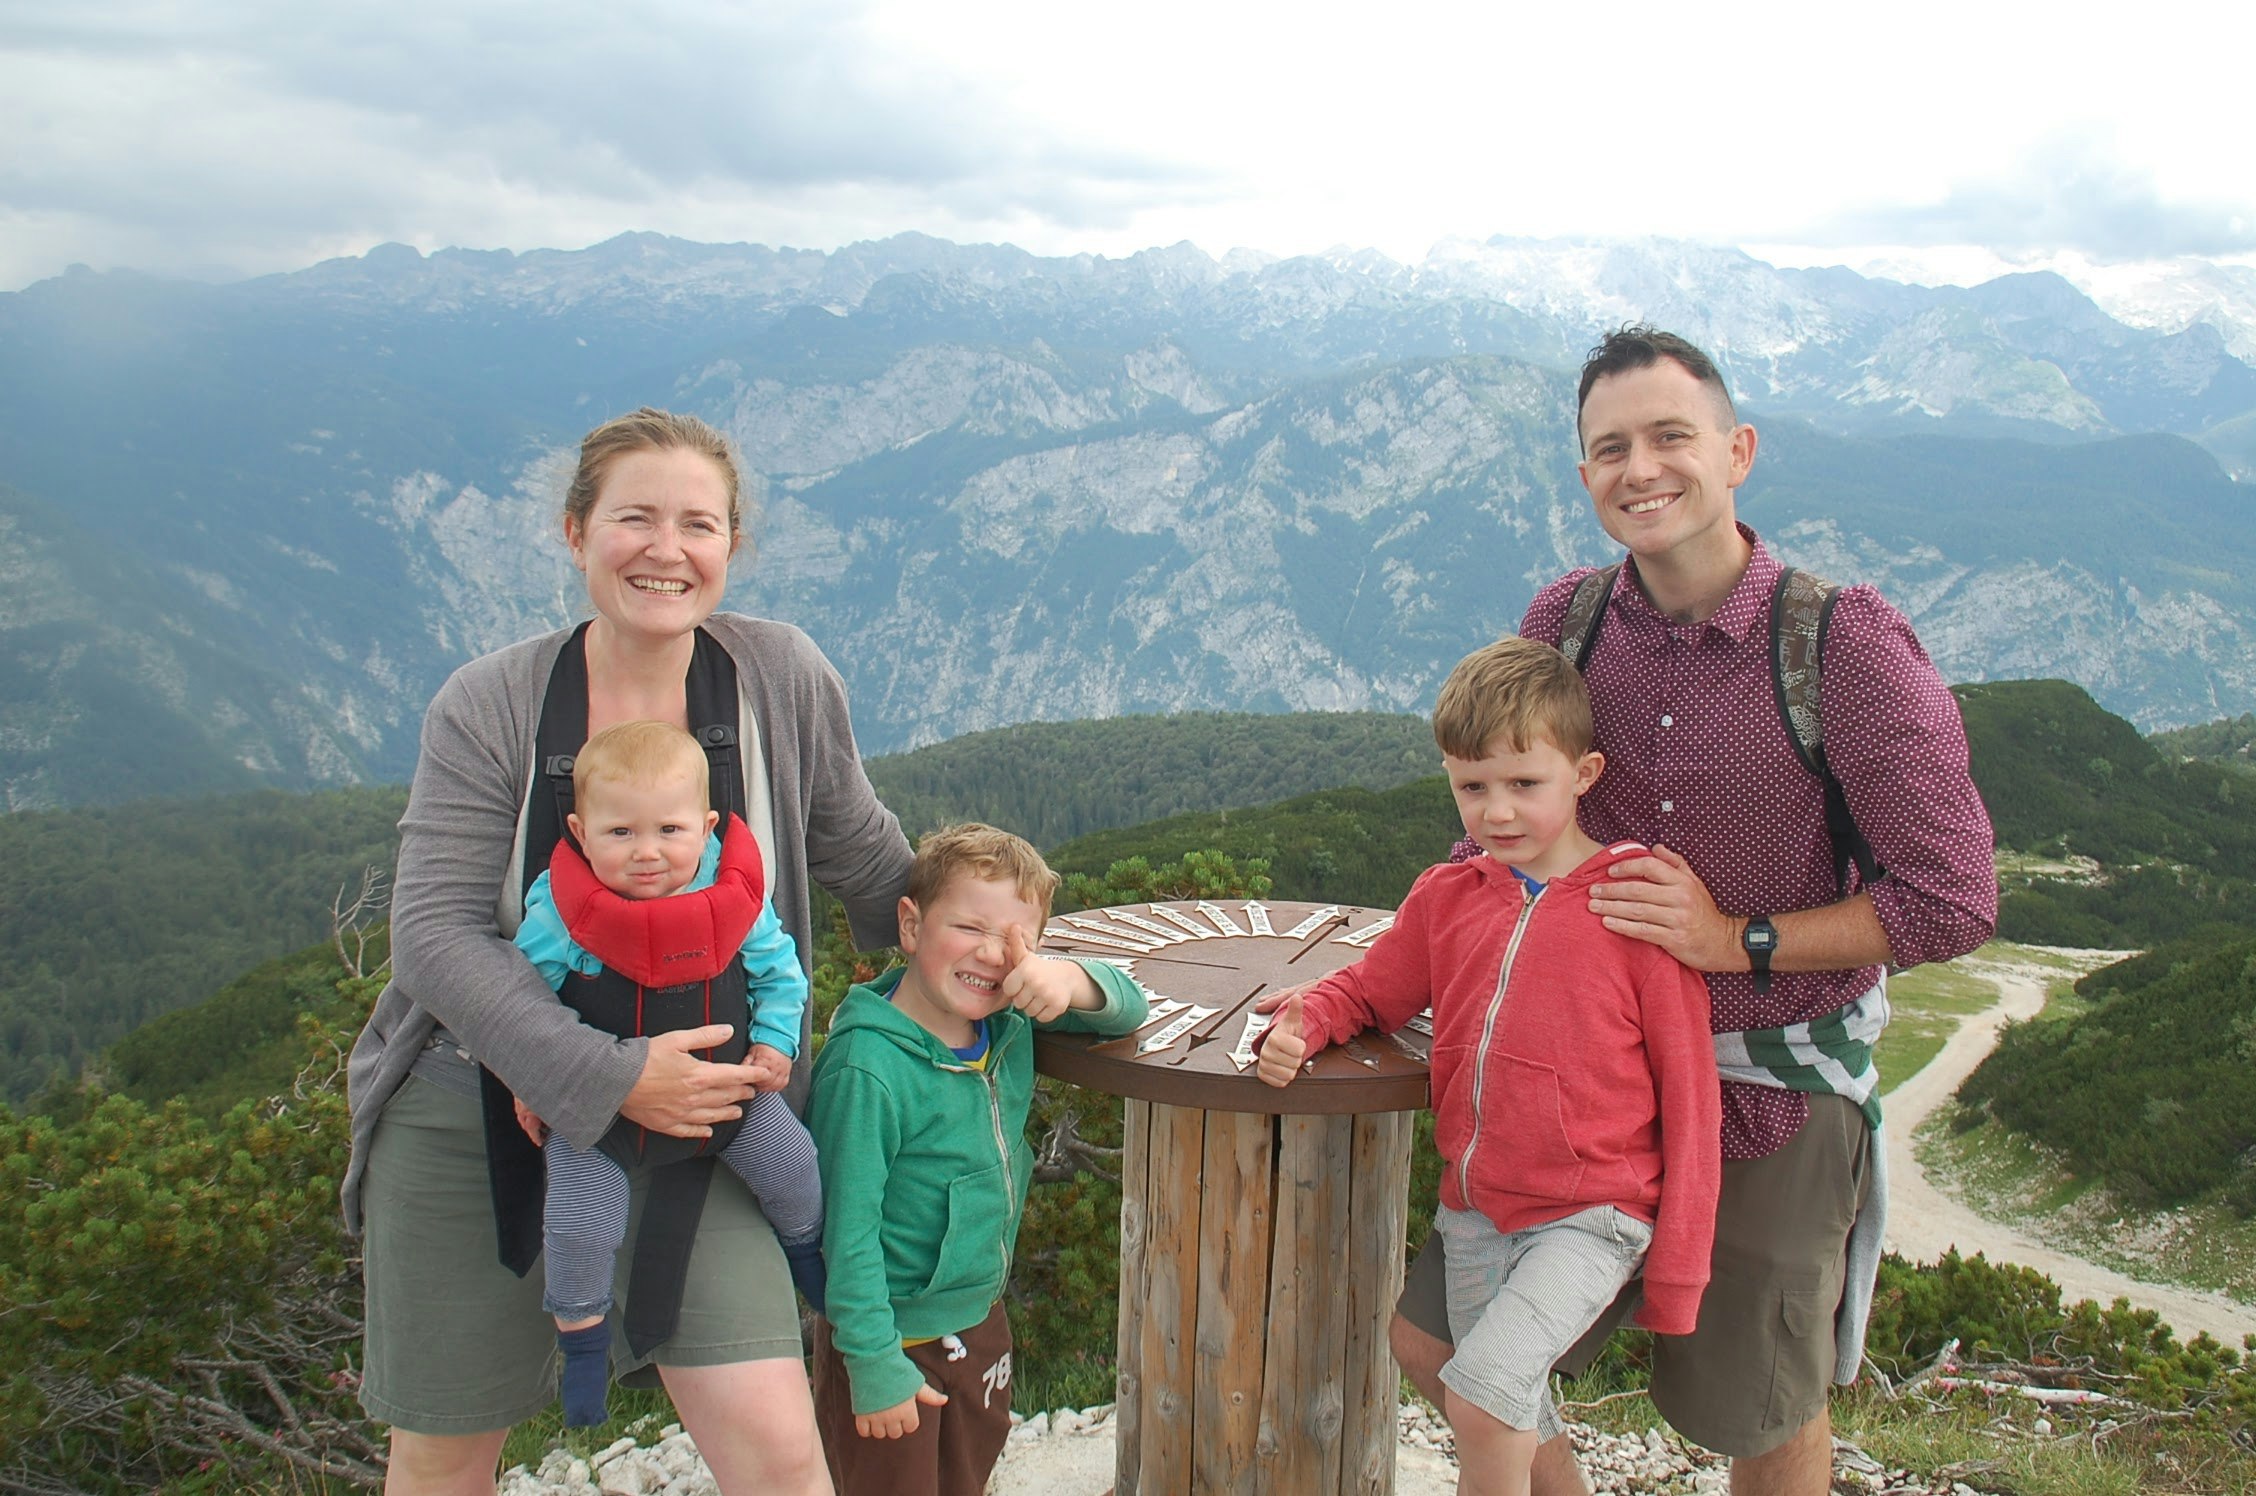 Imogen, her baby and two older children with husband Tom on top of an alpine mountain.